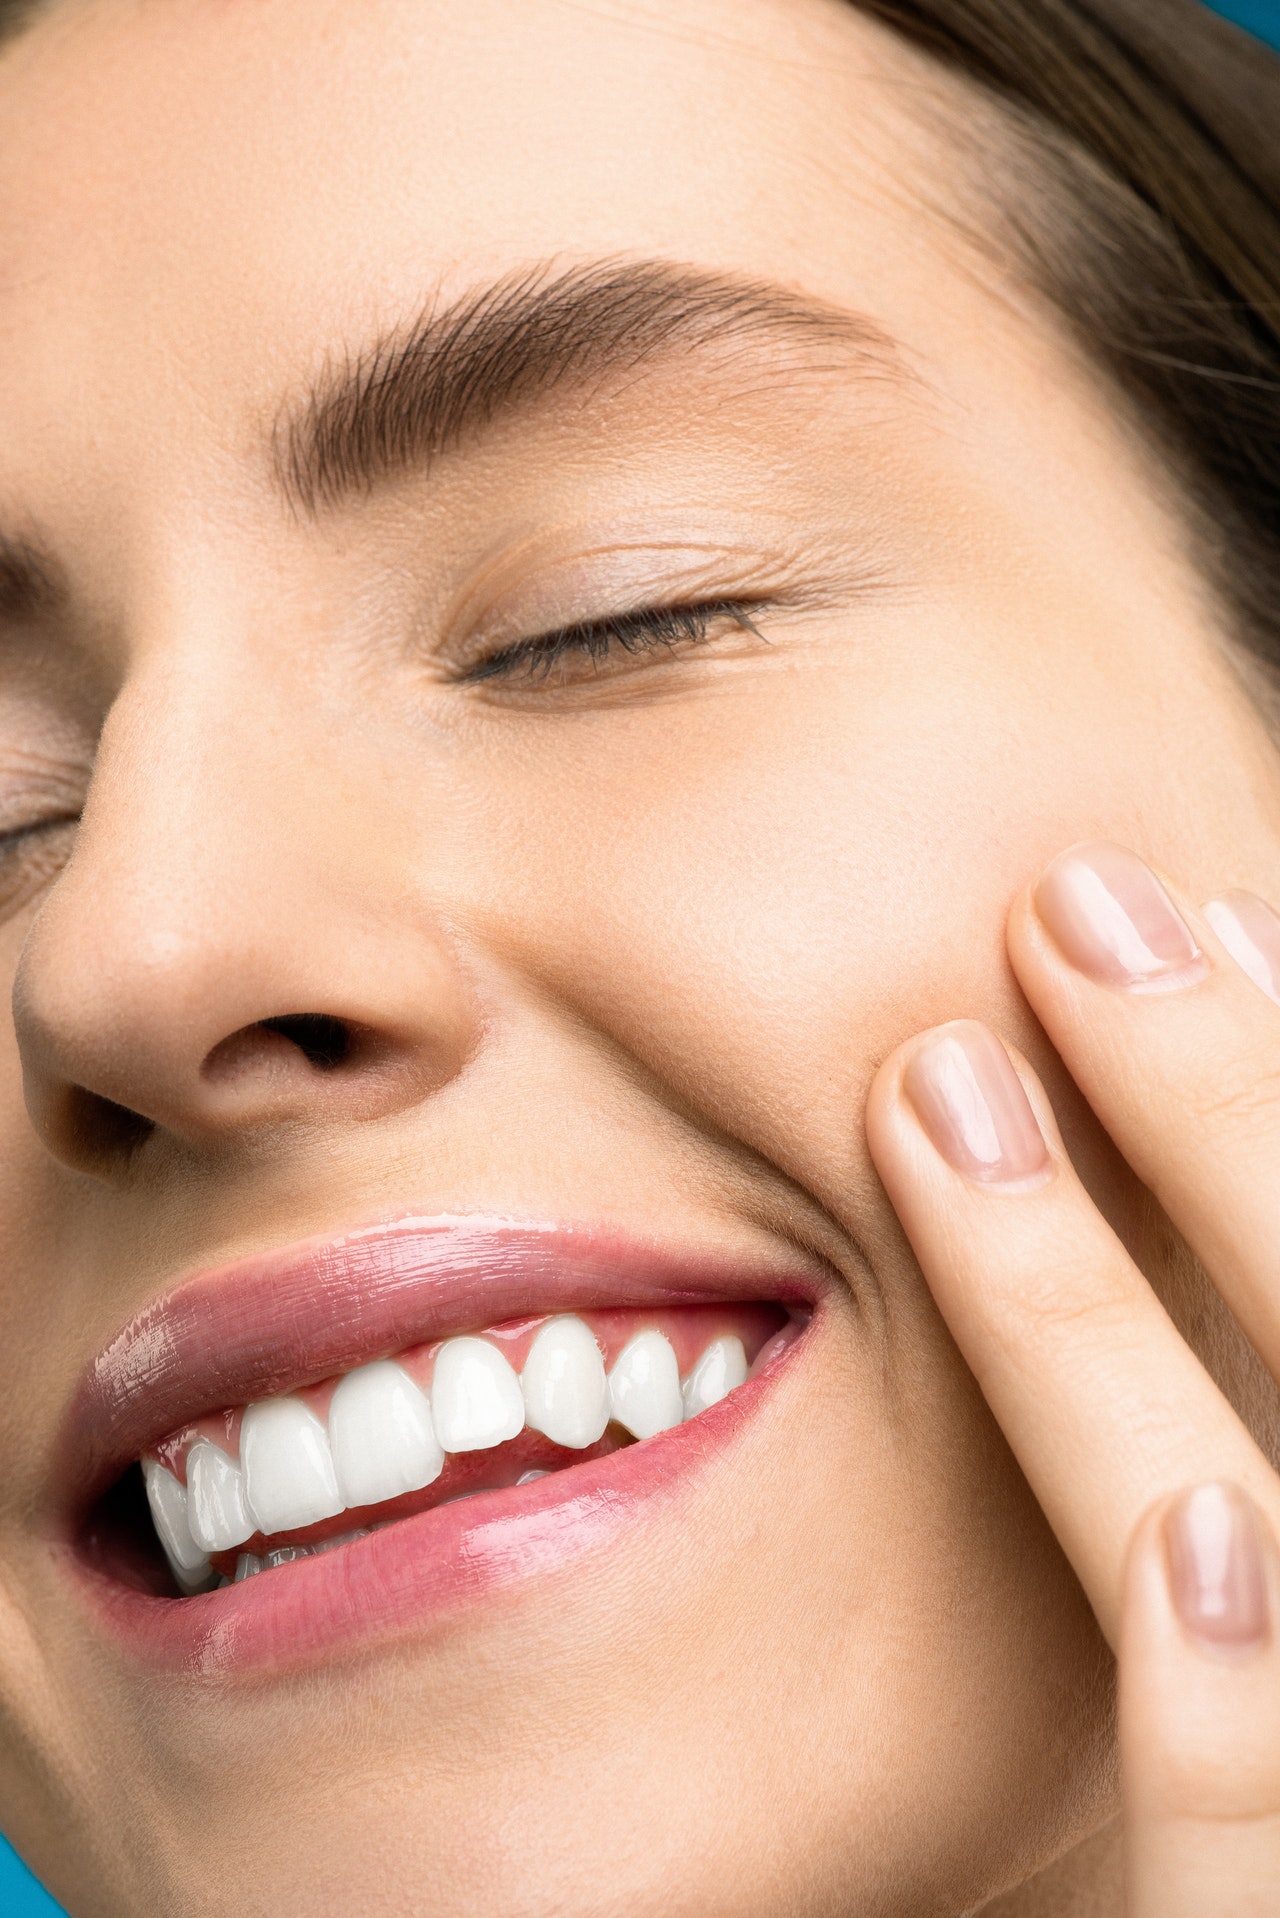 How to Restore Your Dazzling Smile